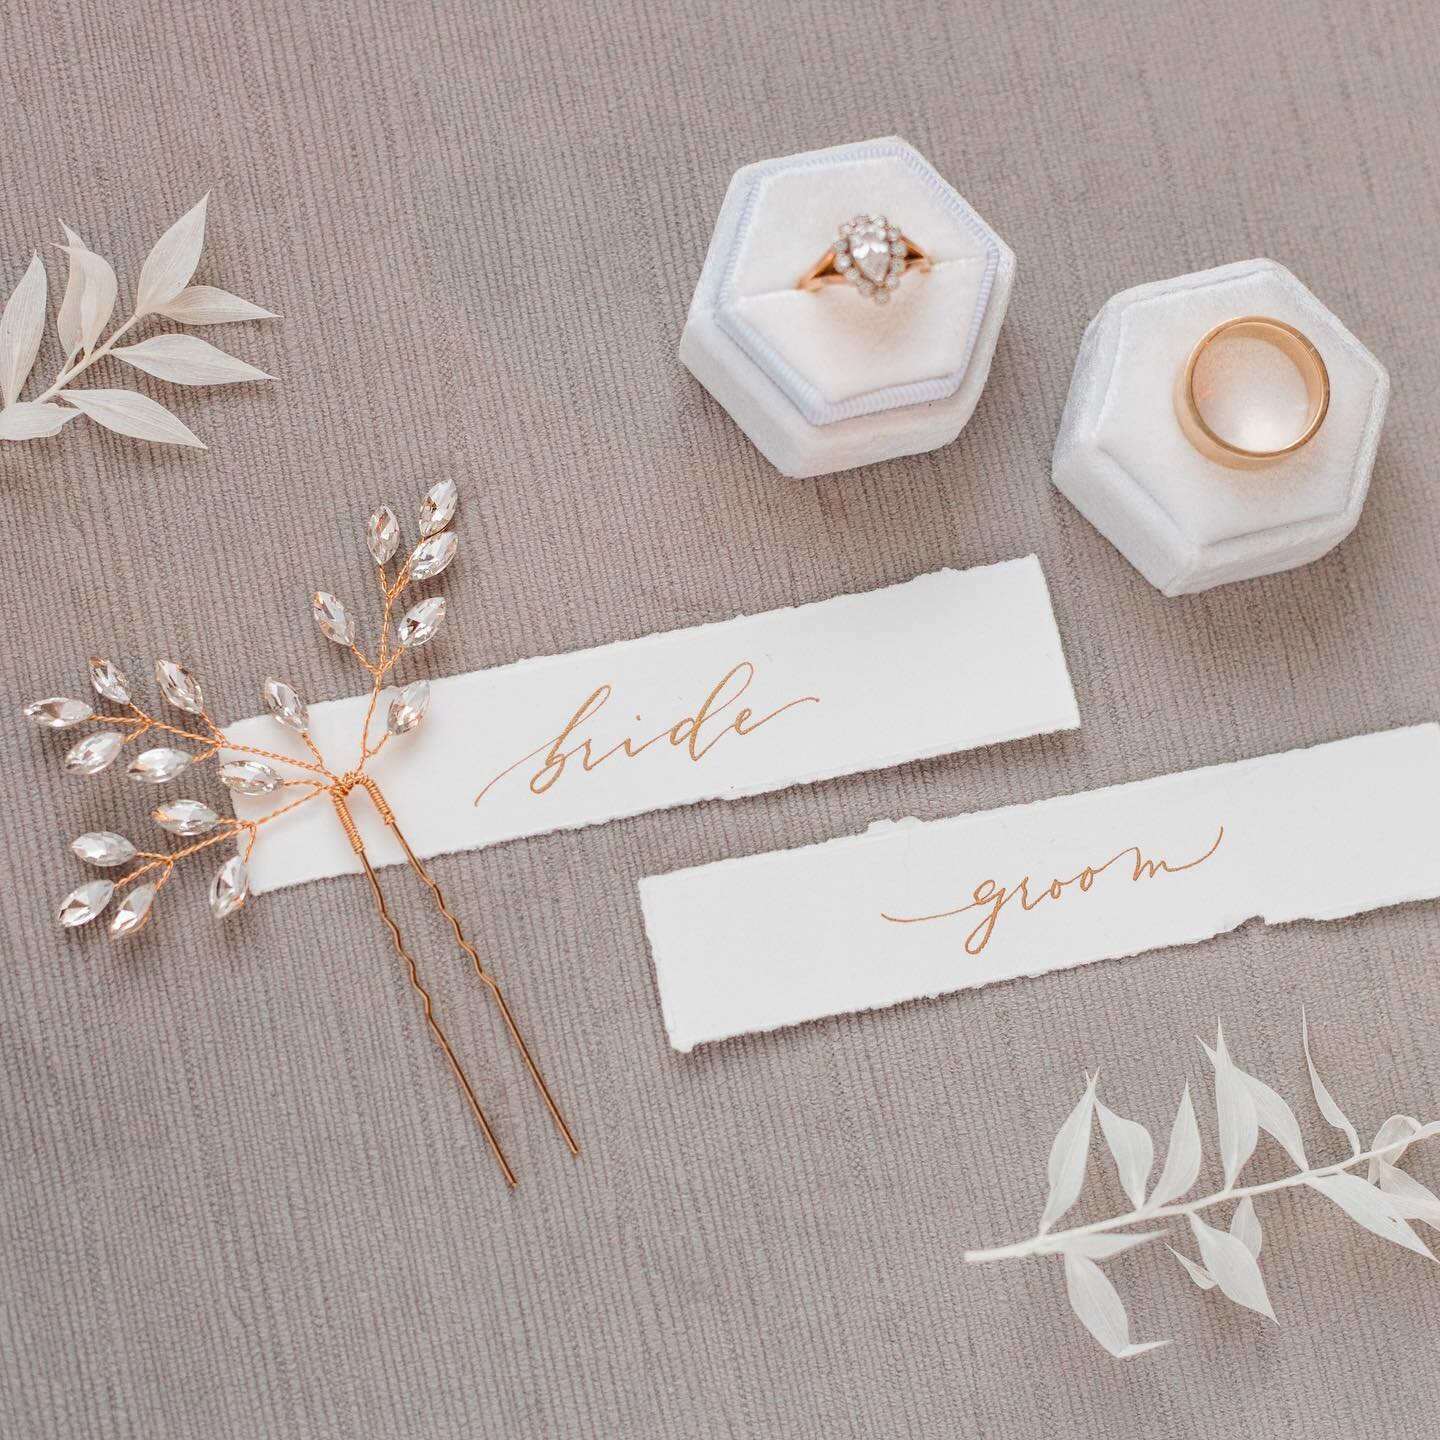 A big shout out to @flyfreeweddings for this wonderful photo!! It contains out white velvet single slot ringbox and our crystal branch pin!! I just love it 🧡

#yeg #yyc #yvr #yyt #shoplocal #yegshoplocal #yycshoplocal #yyz #toronto #vancouver #weddi